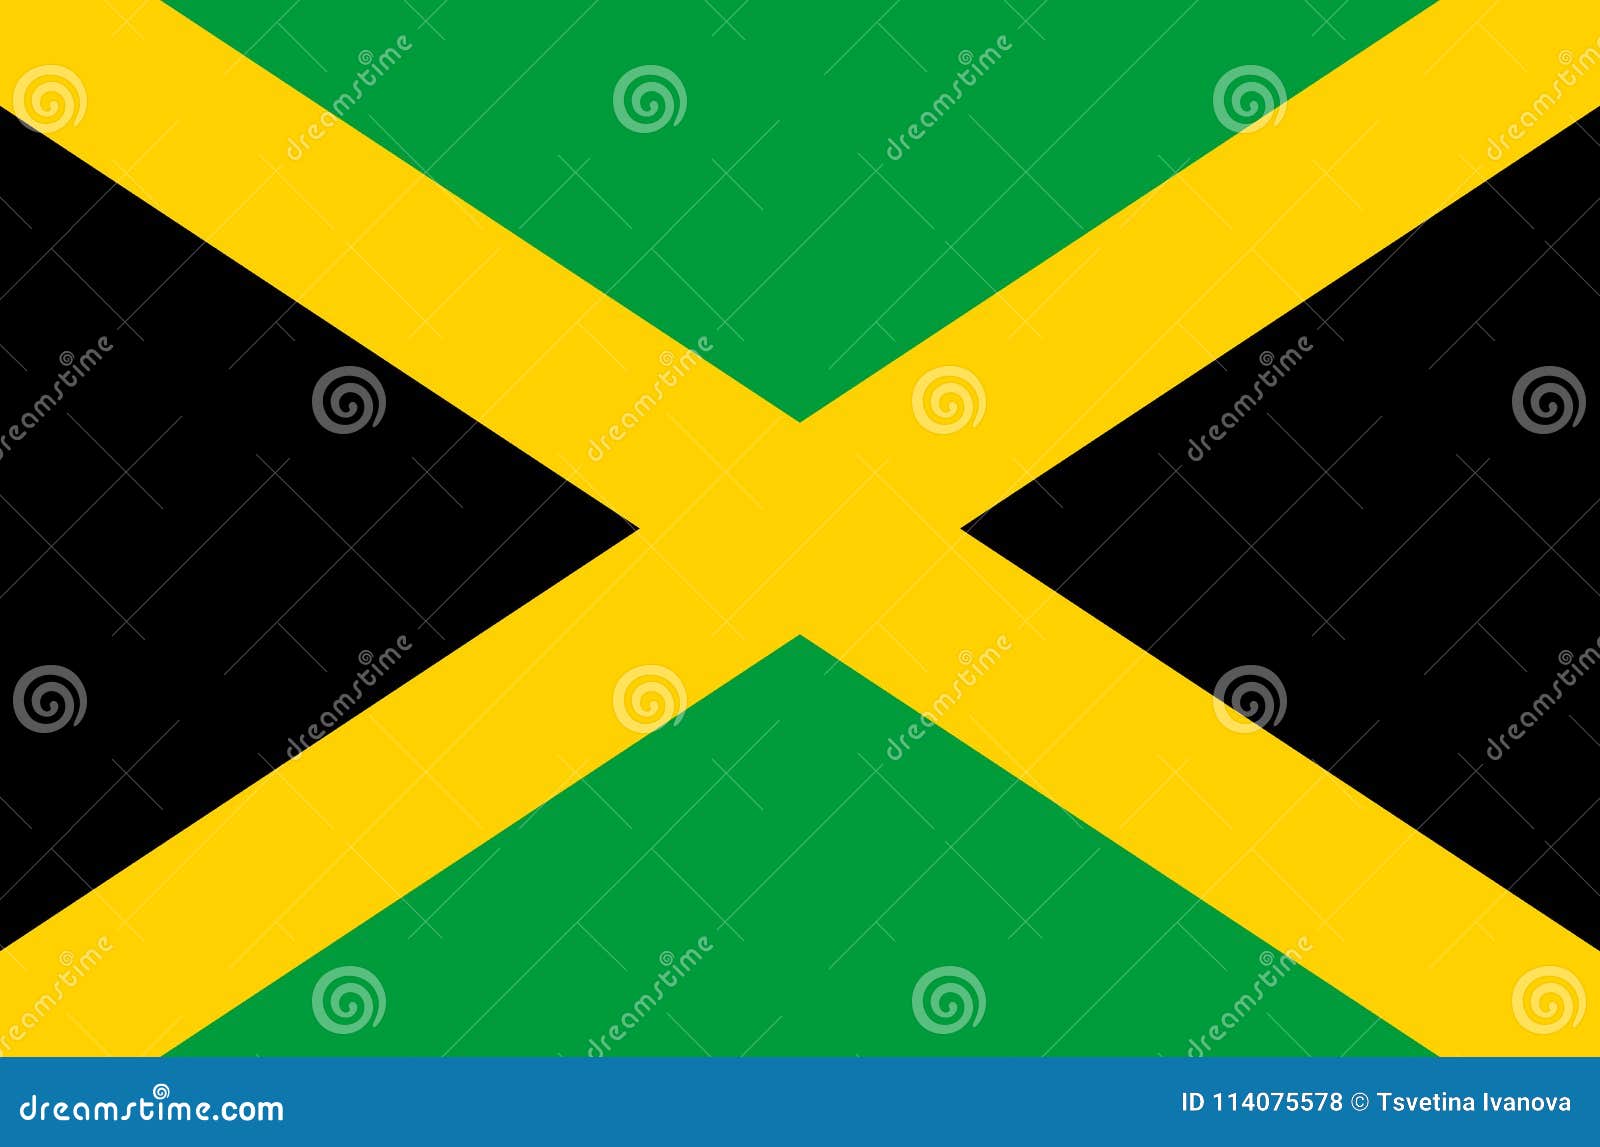 jamaican national flag, official flag of jamaica accurate colors